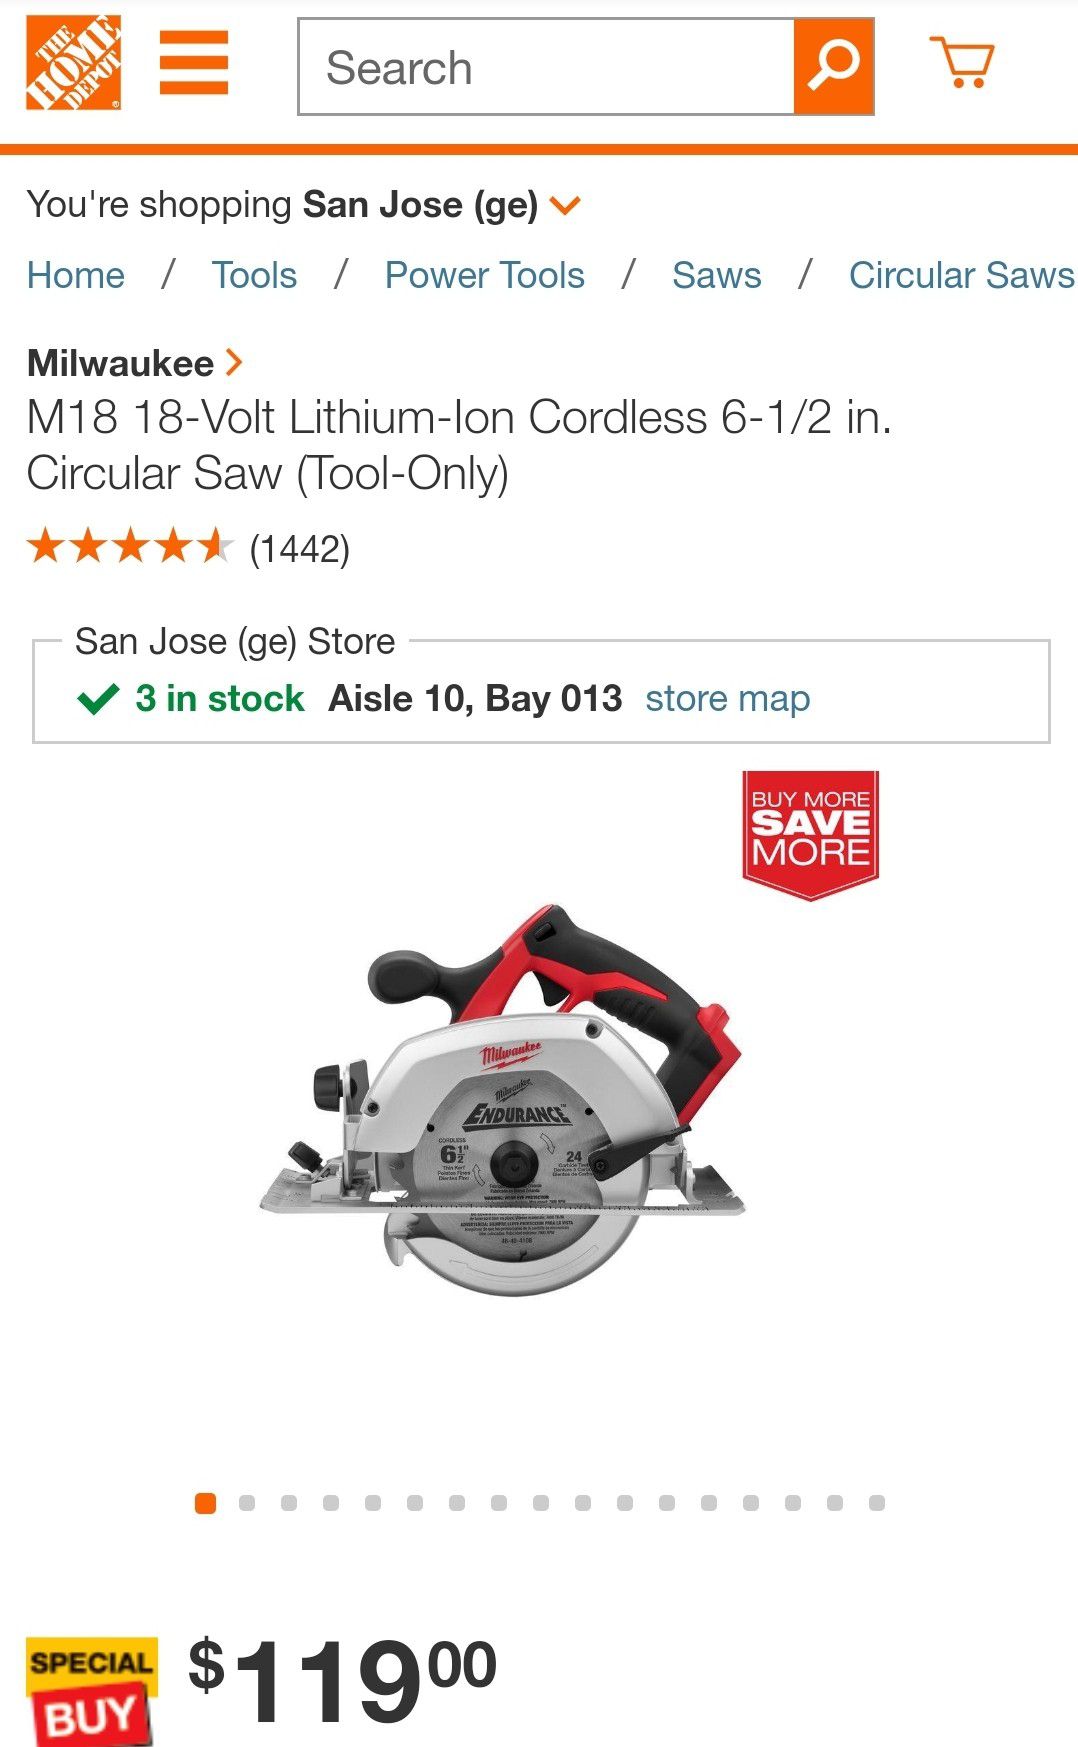 Milwaukee M18 6-1/2 in. Cordless 18 volt Circular Saw Bare Tool 3500 rpm